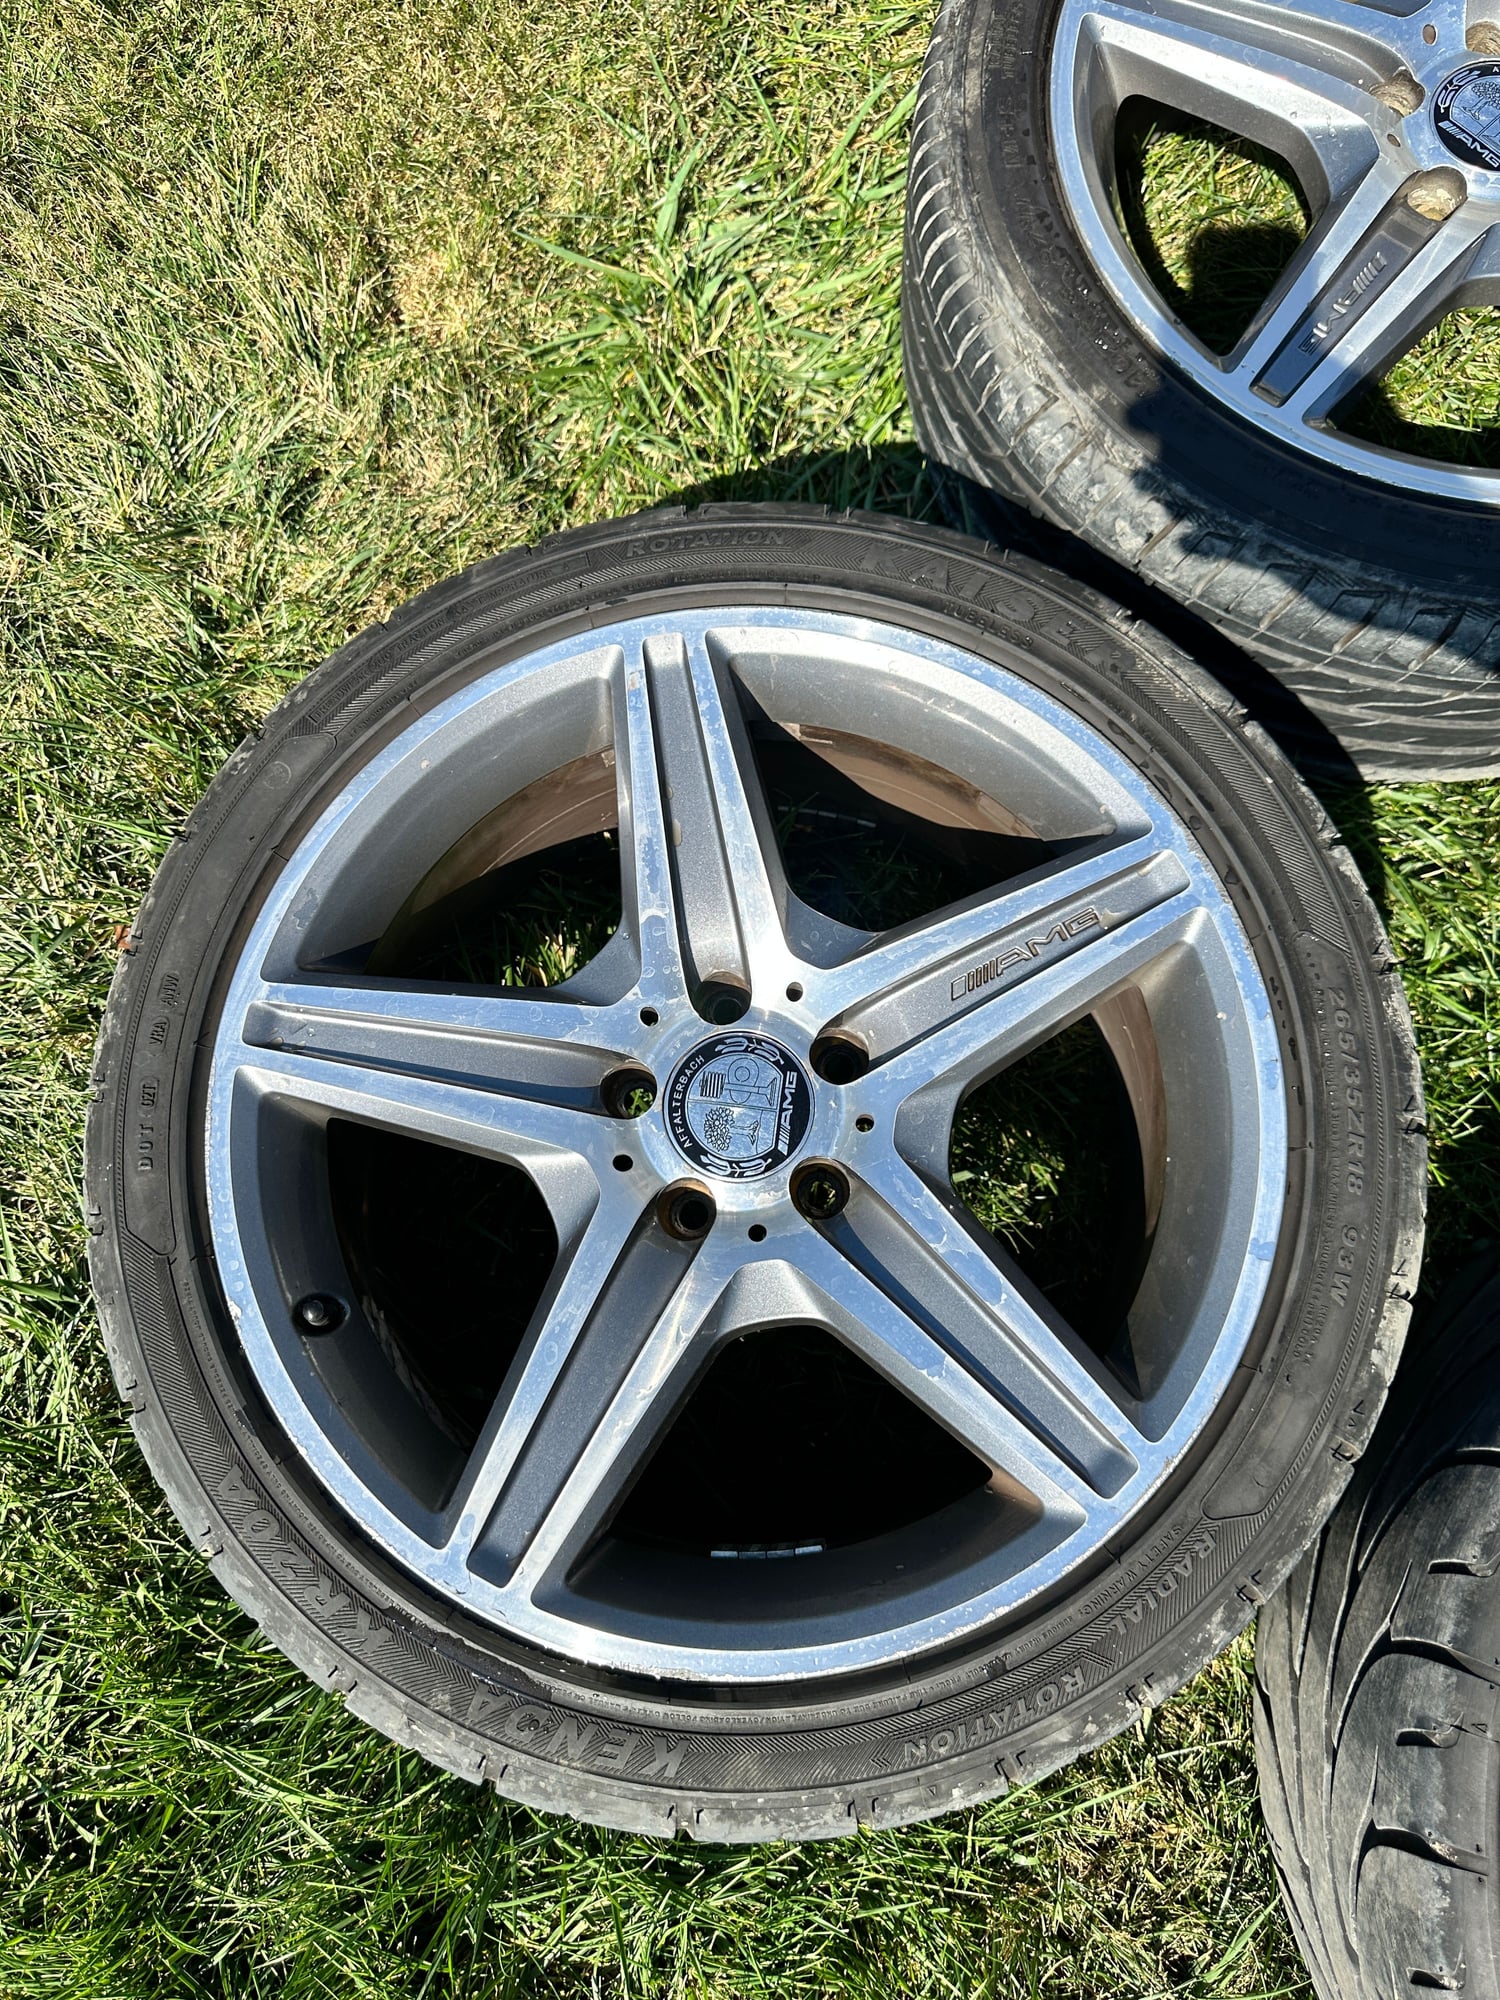 Wheels and Tires/Axles - W211 E63 Wheels - Used - 2007 to 2009 Mercedes-Benz E63 AMG - 2003 to 2006 Mercedes-Benz E55 AMG - 2003 to 2009 Mercedes-Benz E-Class - 2003 to 2009 Mercedes-Benz SL55 AMG - Columbus, OH 43213, United States